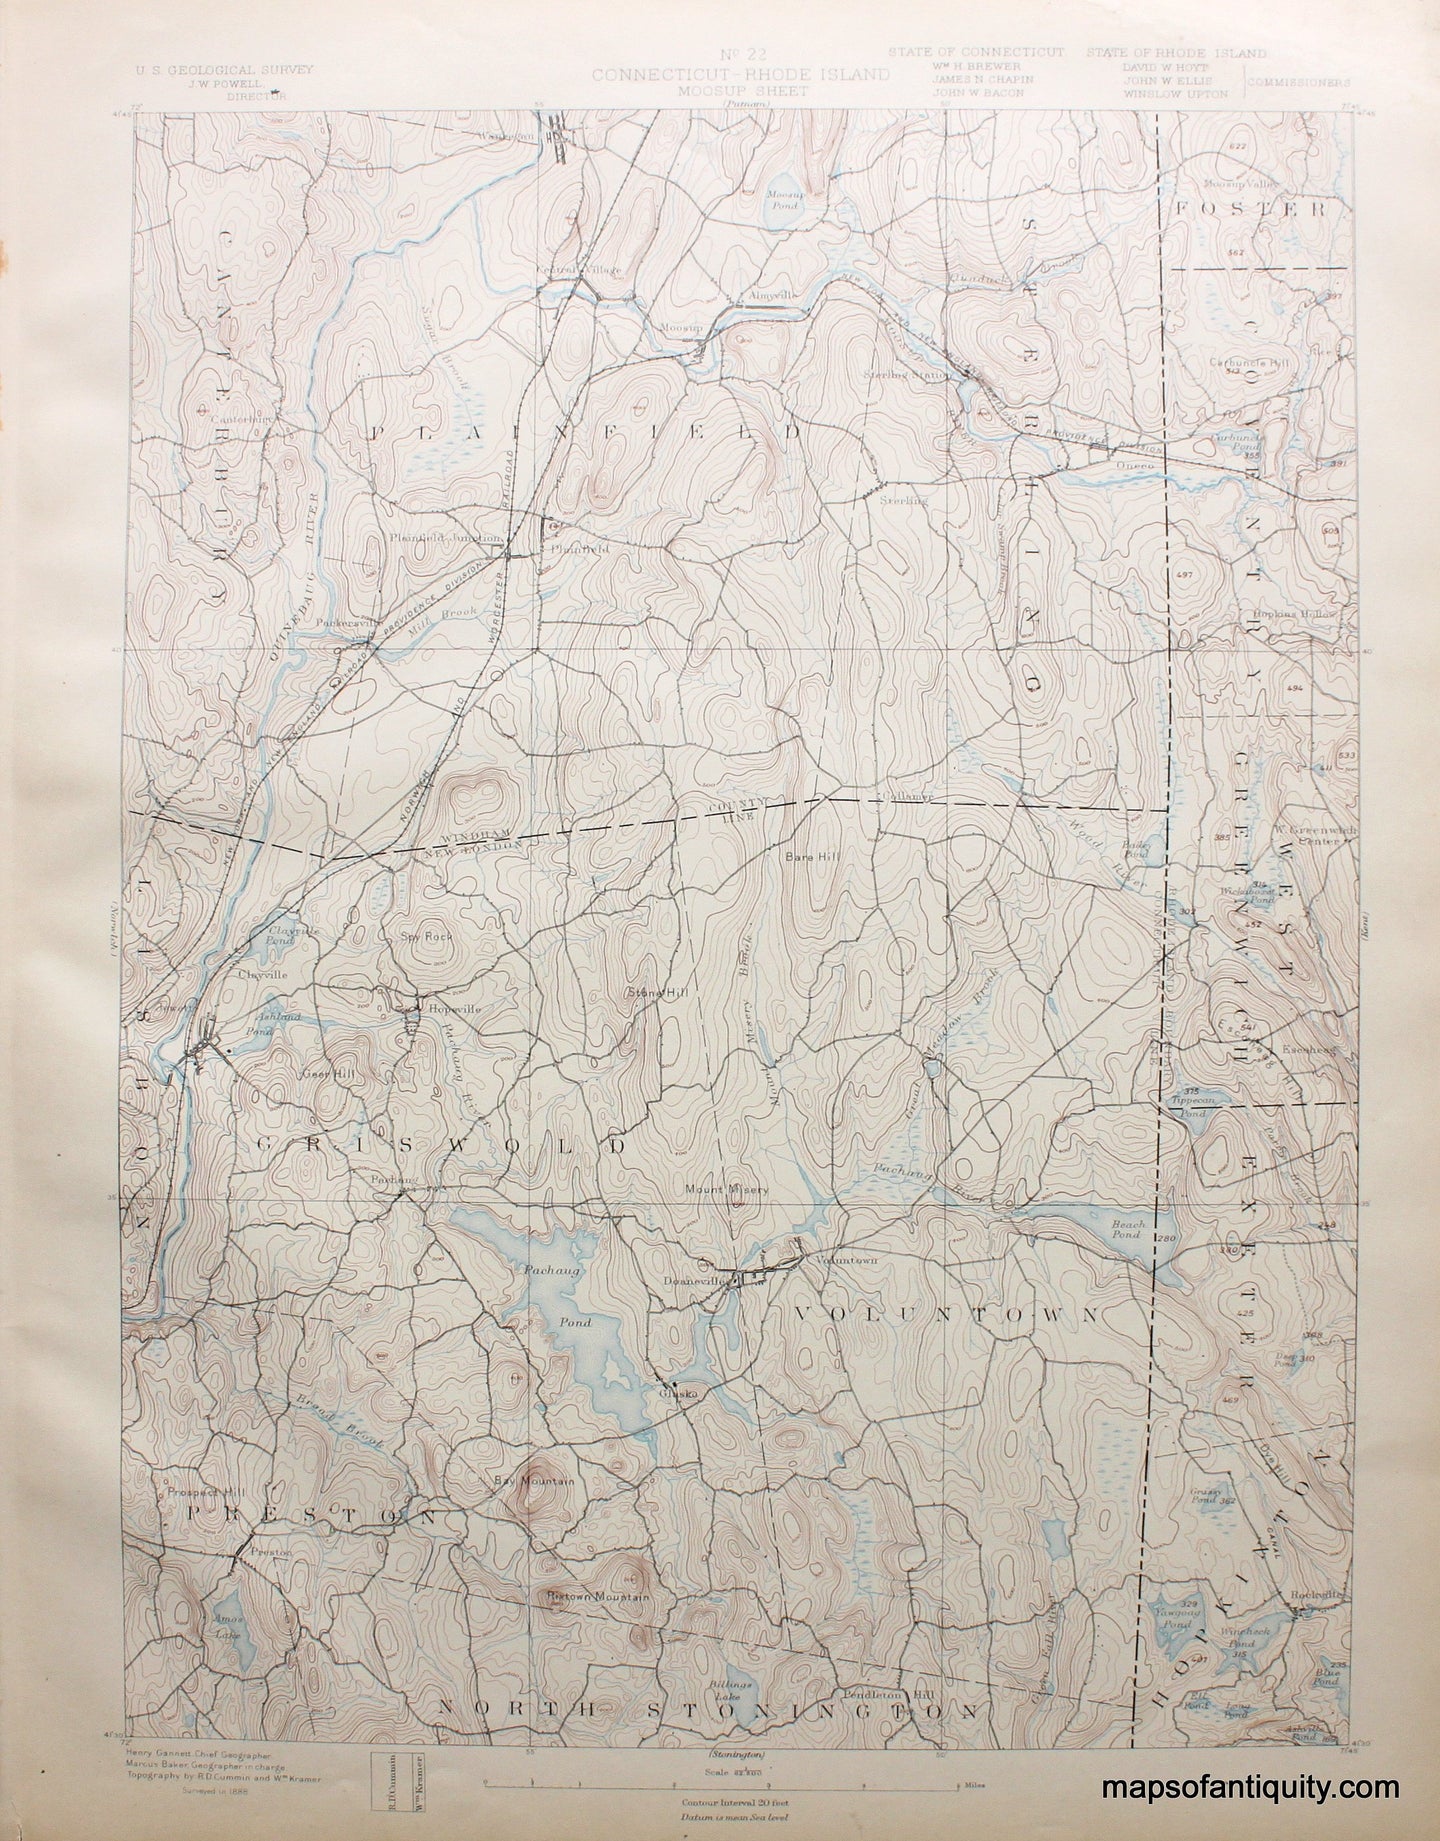 Topographical-Map-CT-Moosup-sheet-antique-topo-map--United-States-Connecticut-1888-USGS-Maps-Of-Antiquity